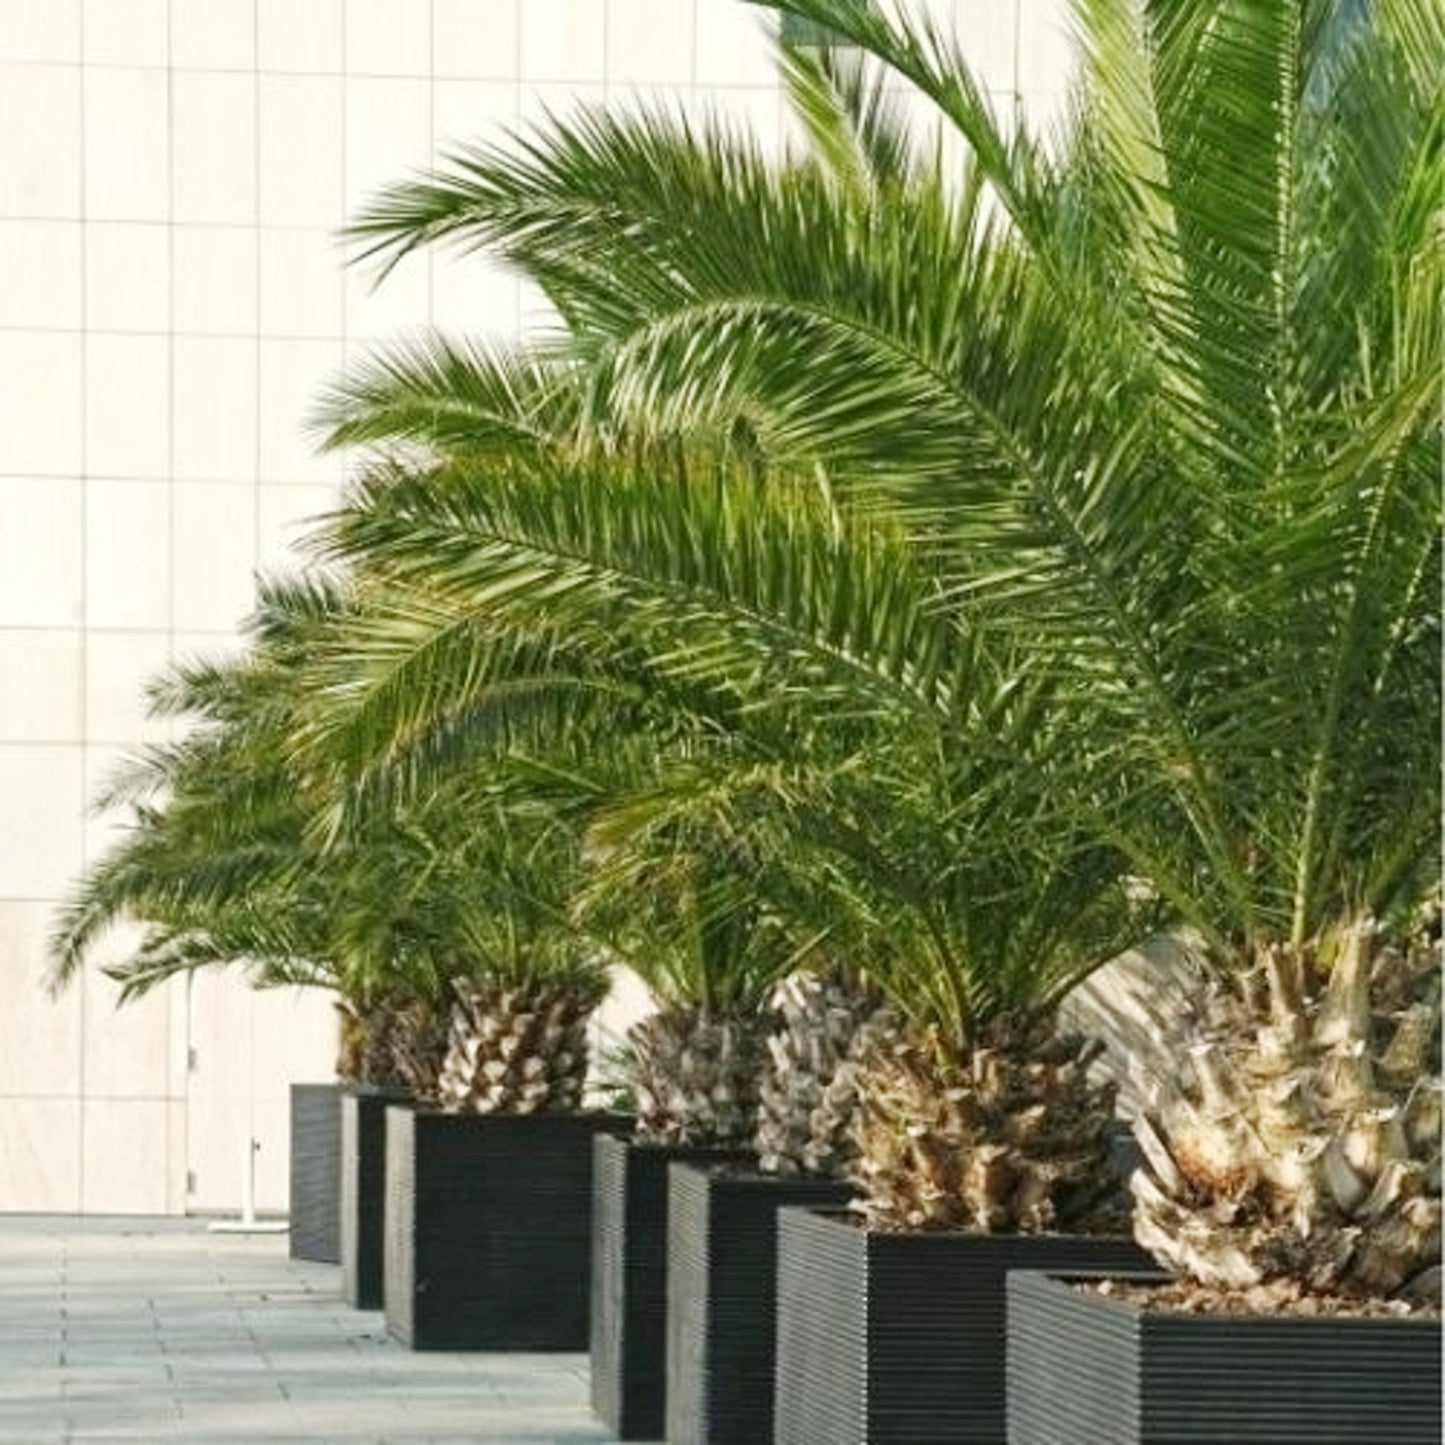 Phoenix canariensis - Canary Island Date Palm - 25 pieces fresh seeds